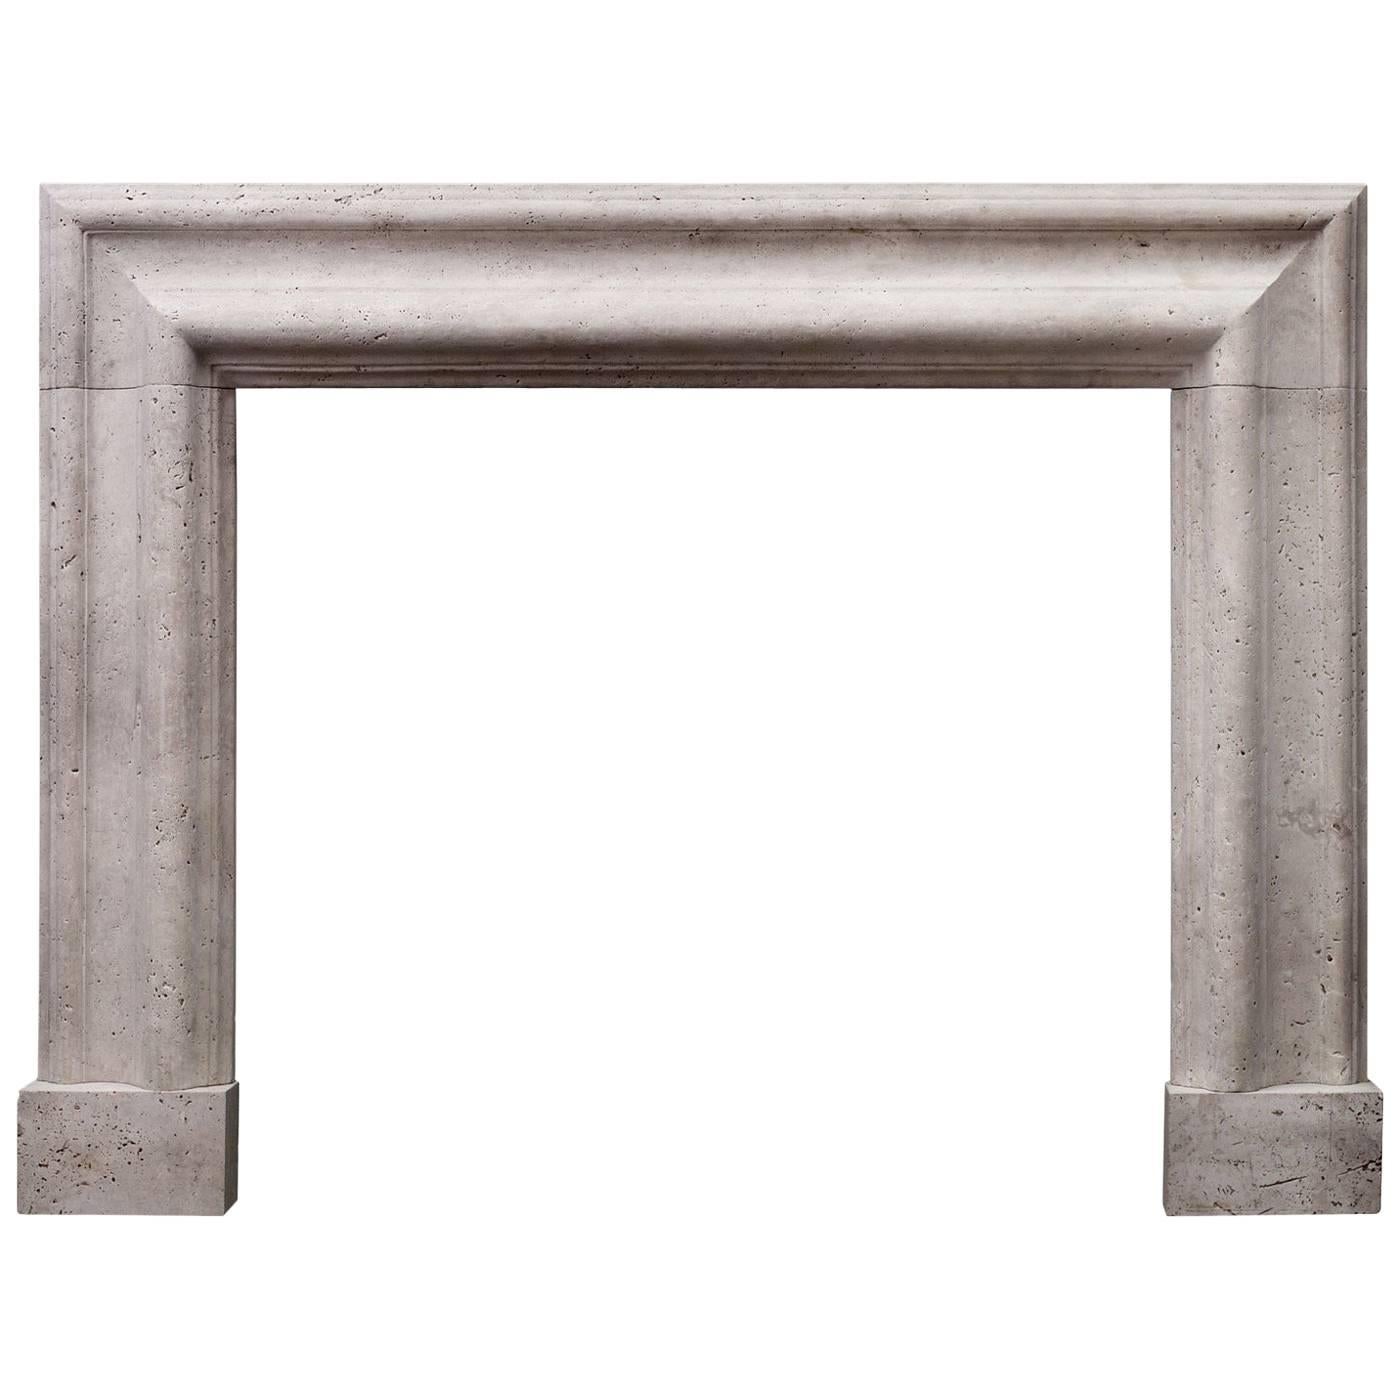 Large English Moulded Bolection Fireplace in White Travertine